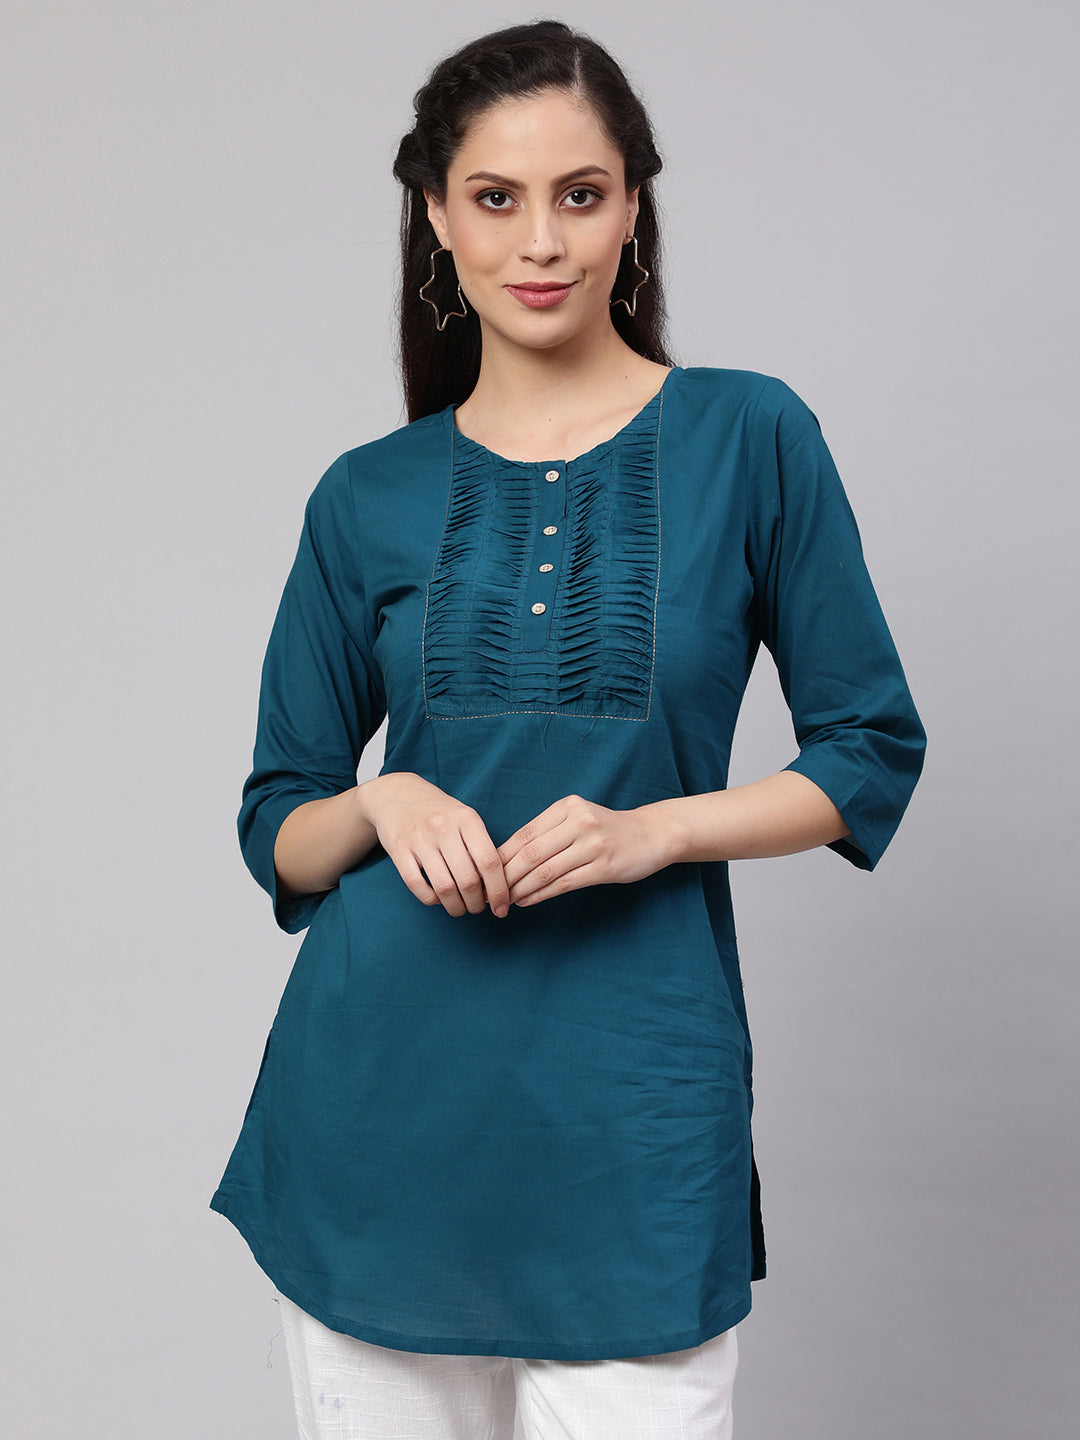 Women's Teal Blue Straight Tunic With Three Quaretr Sleeves - Nayo Clothing